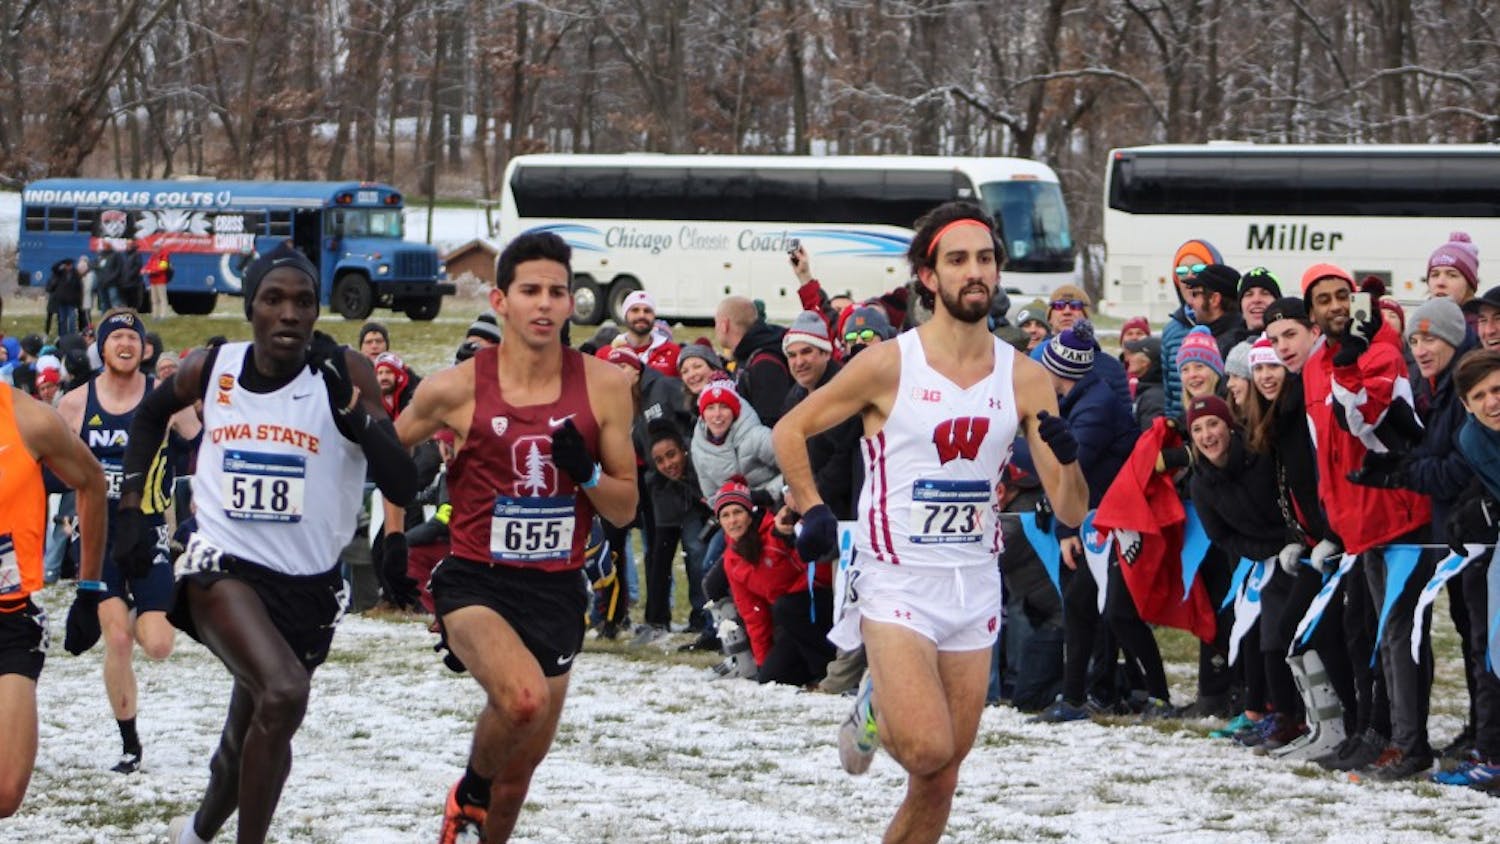 Gallery: 2018 NCAA Cross Country Championships